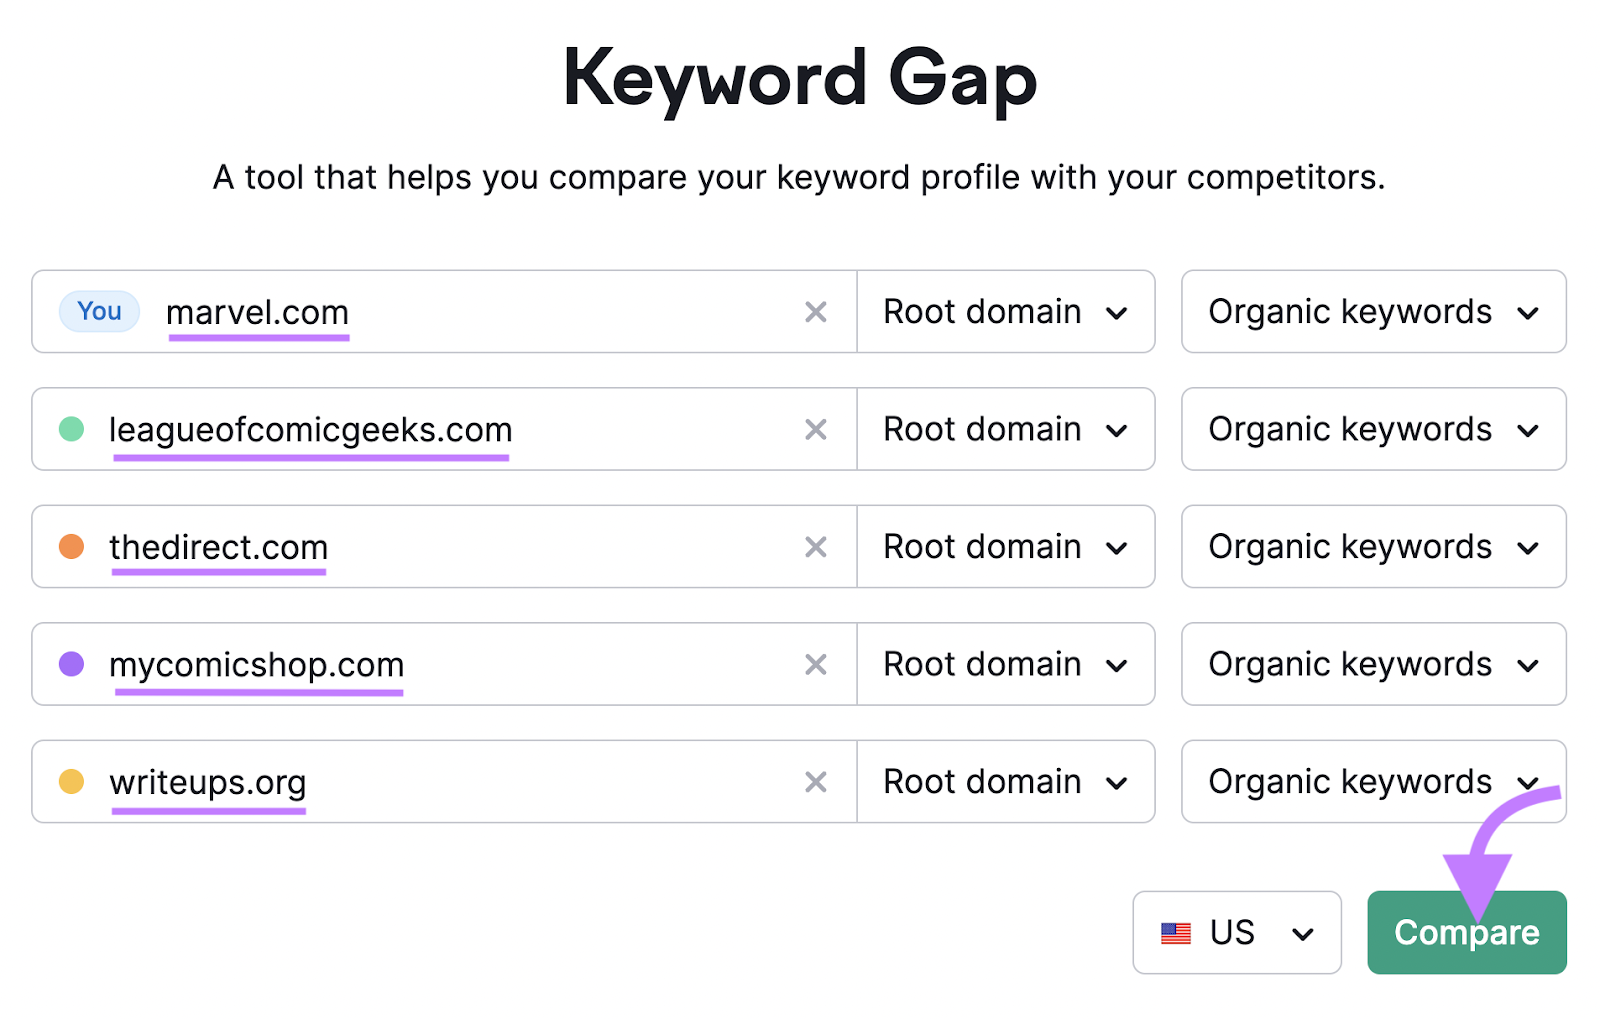 enter your and your competitors’ domains in Keyword Gap tool